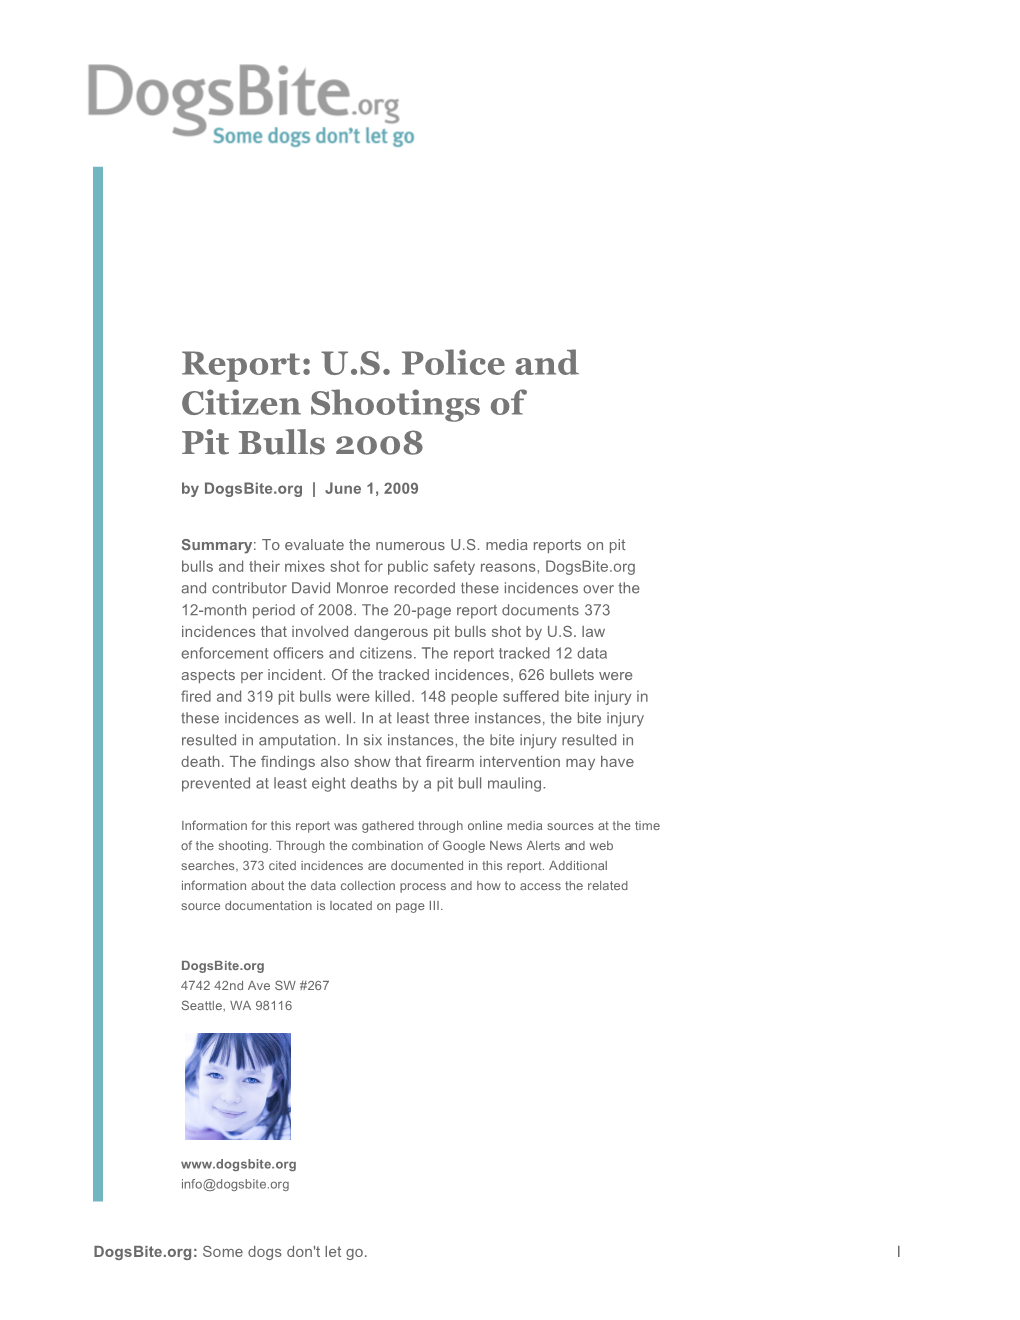 US Police and Citizen Shootings of Pit Bulls 2008